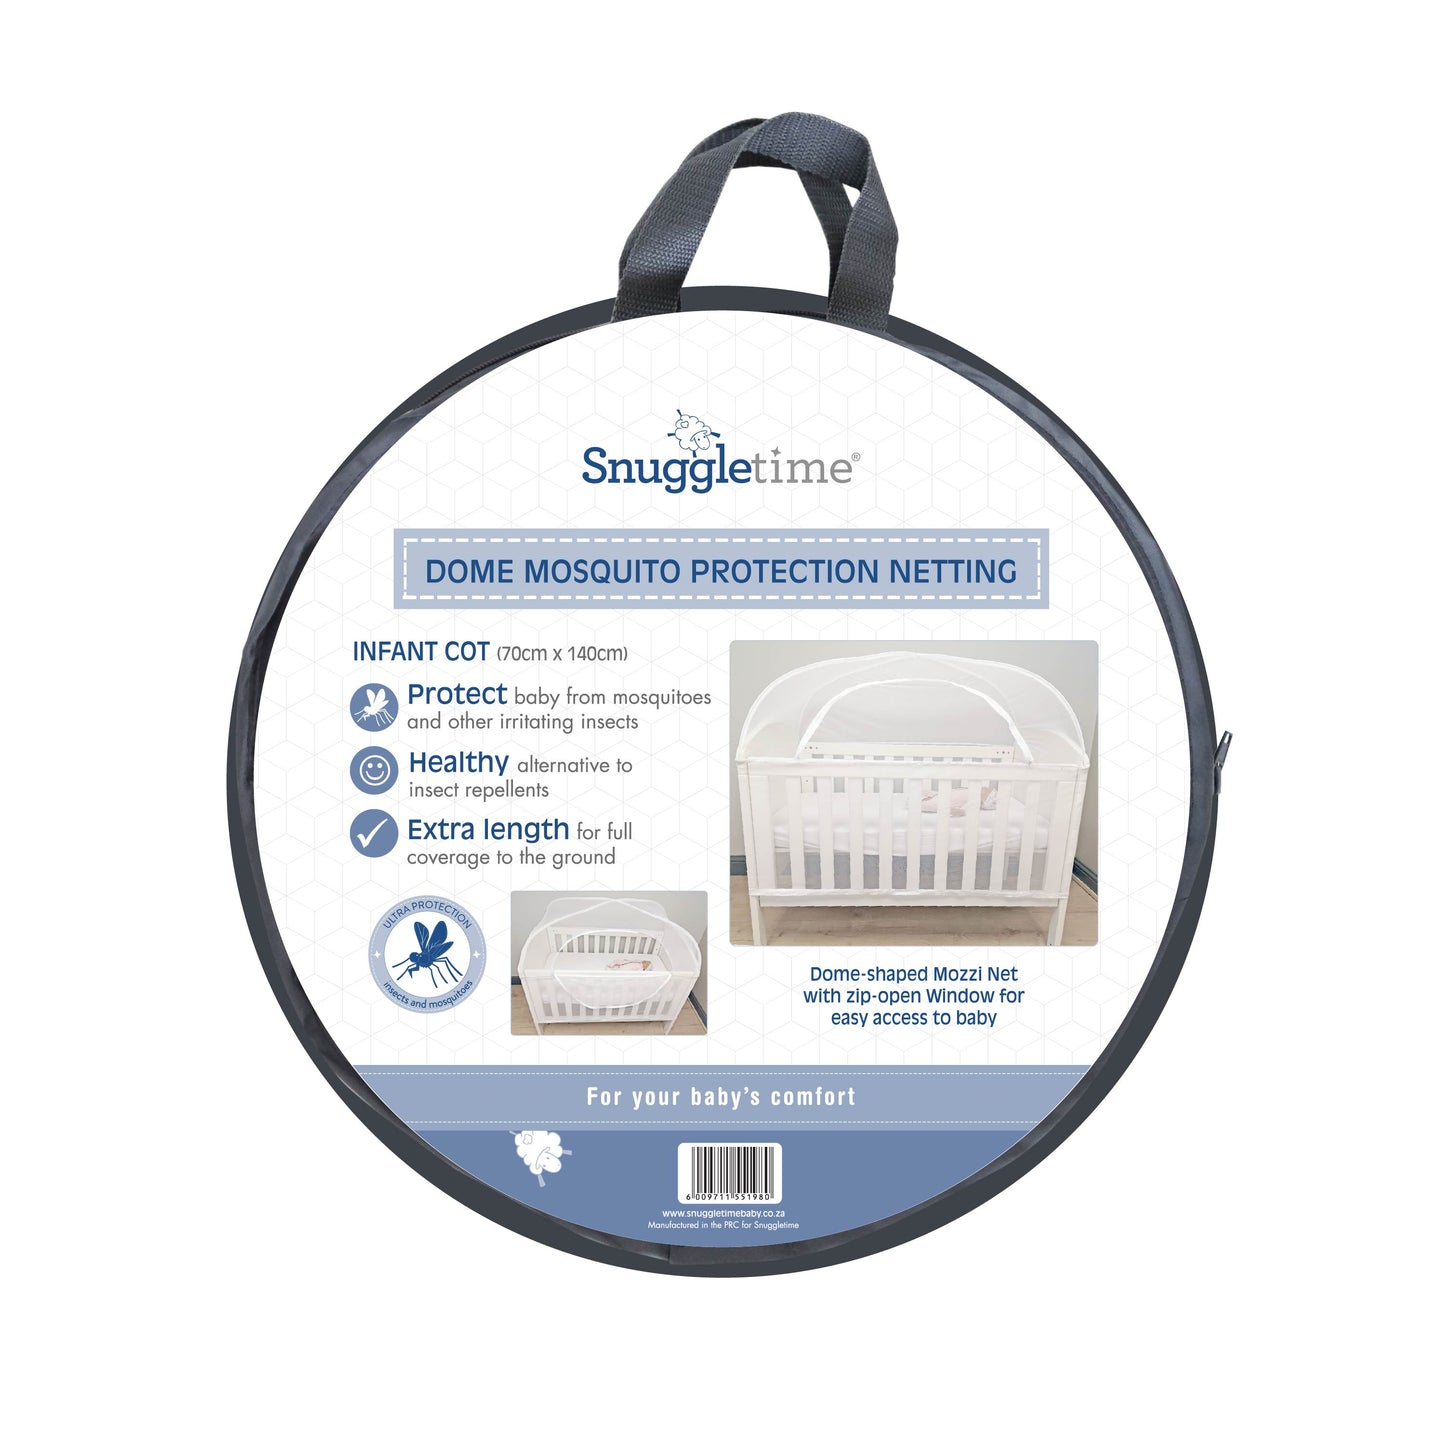 Snuggletime Dome Mosquito Protection Netting